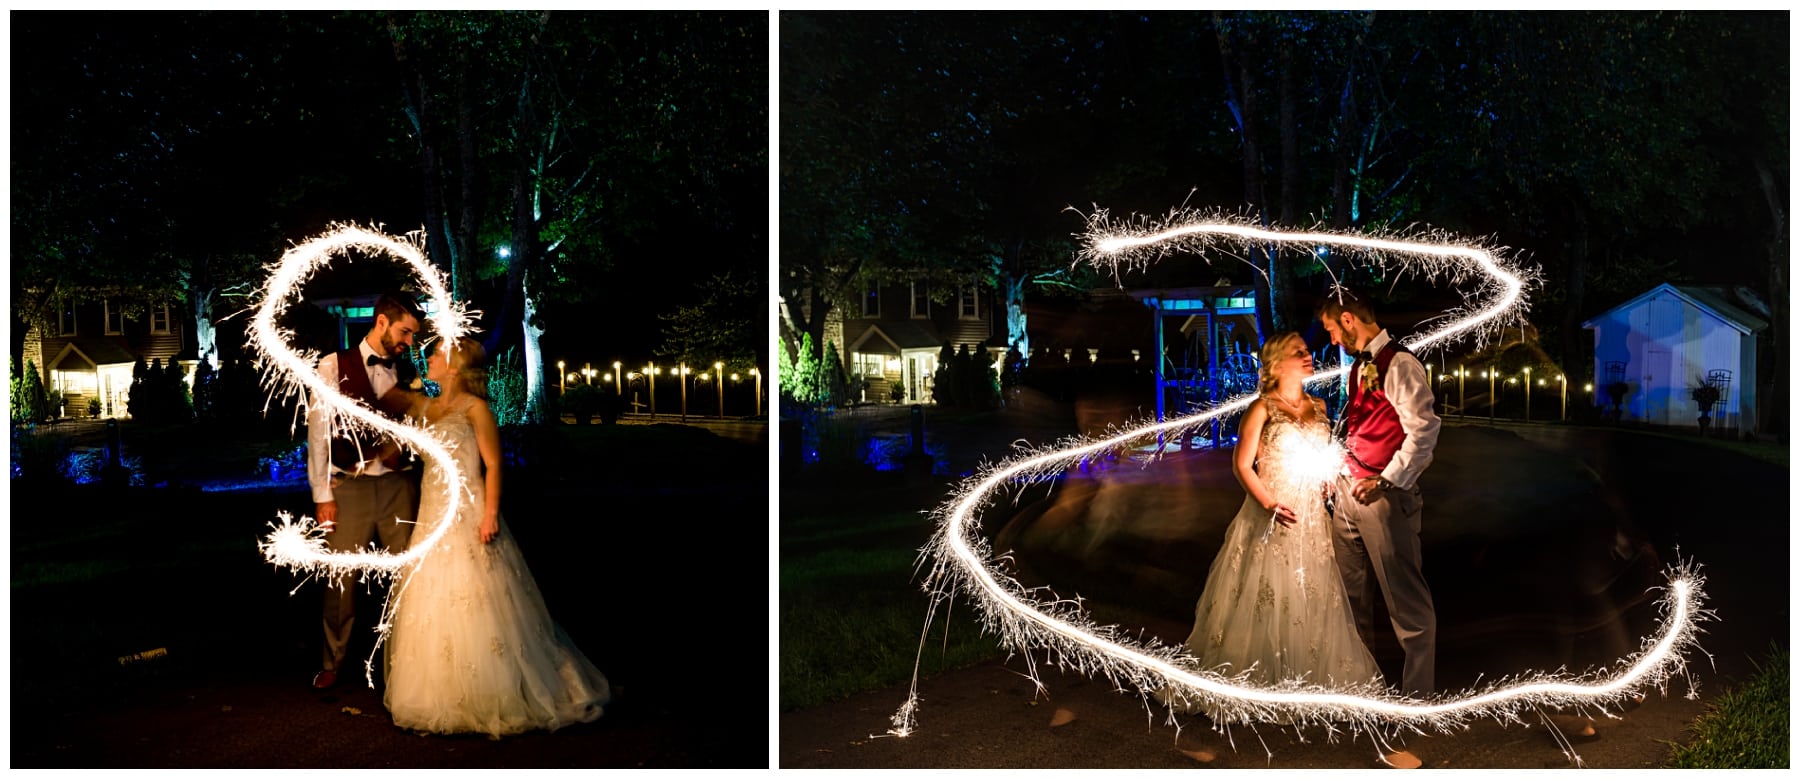 sparklers at wedding with couples letter